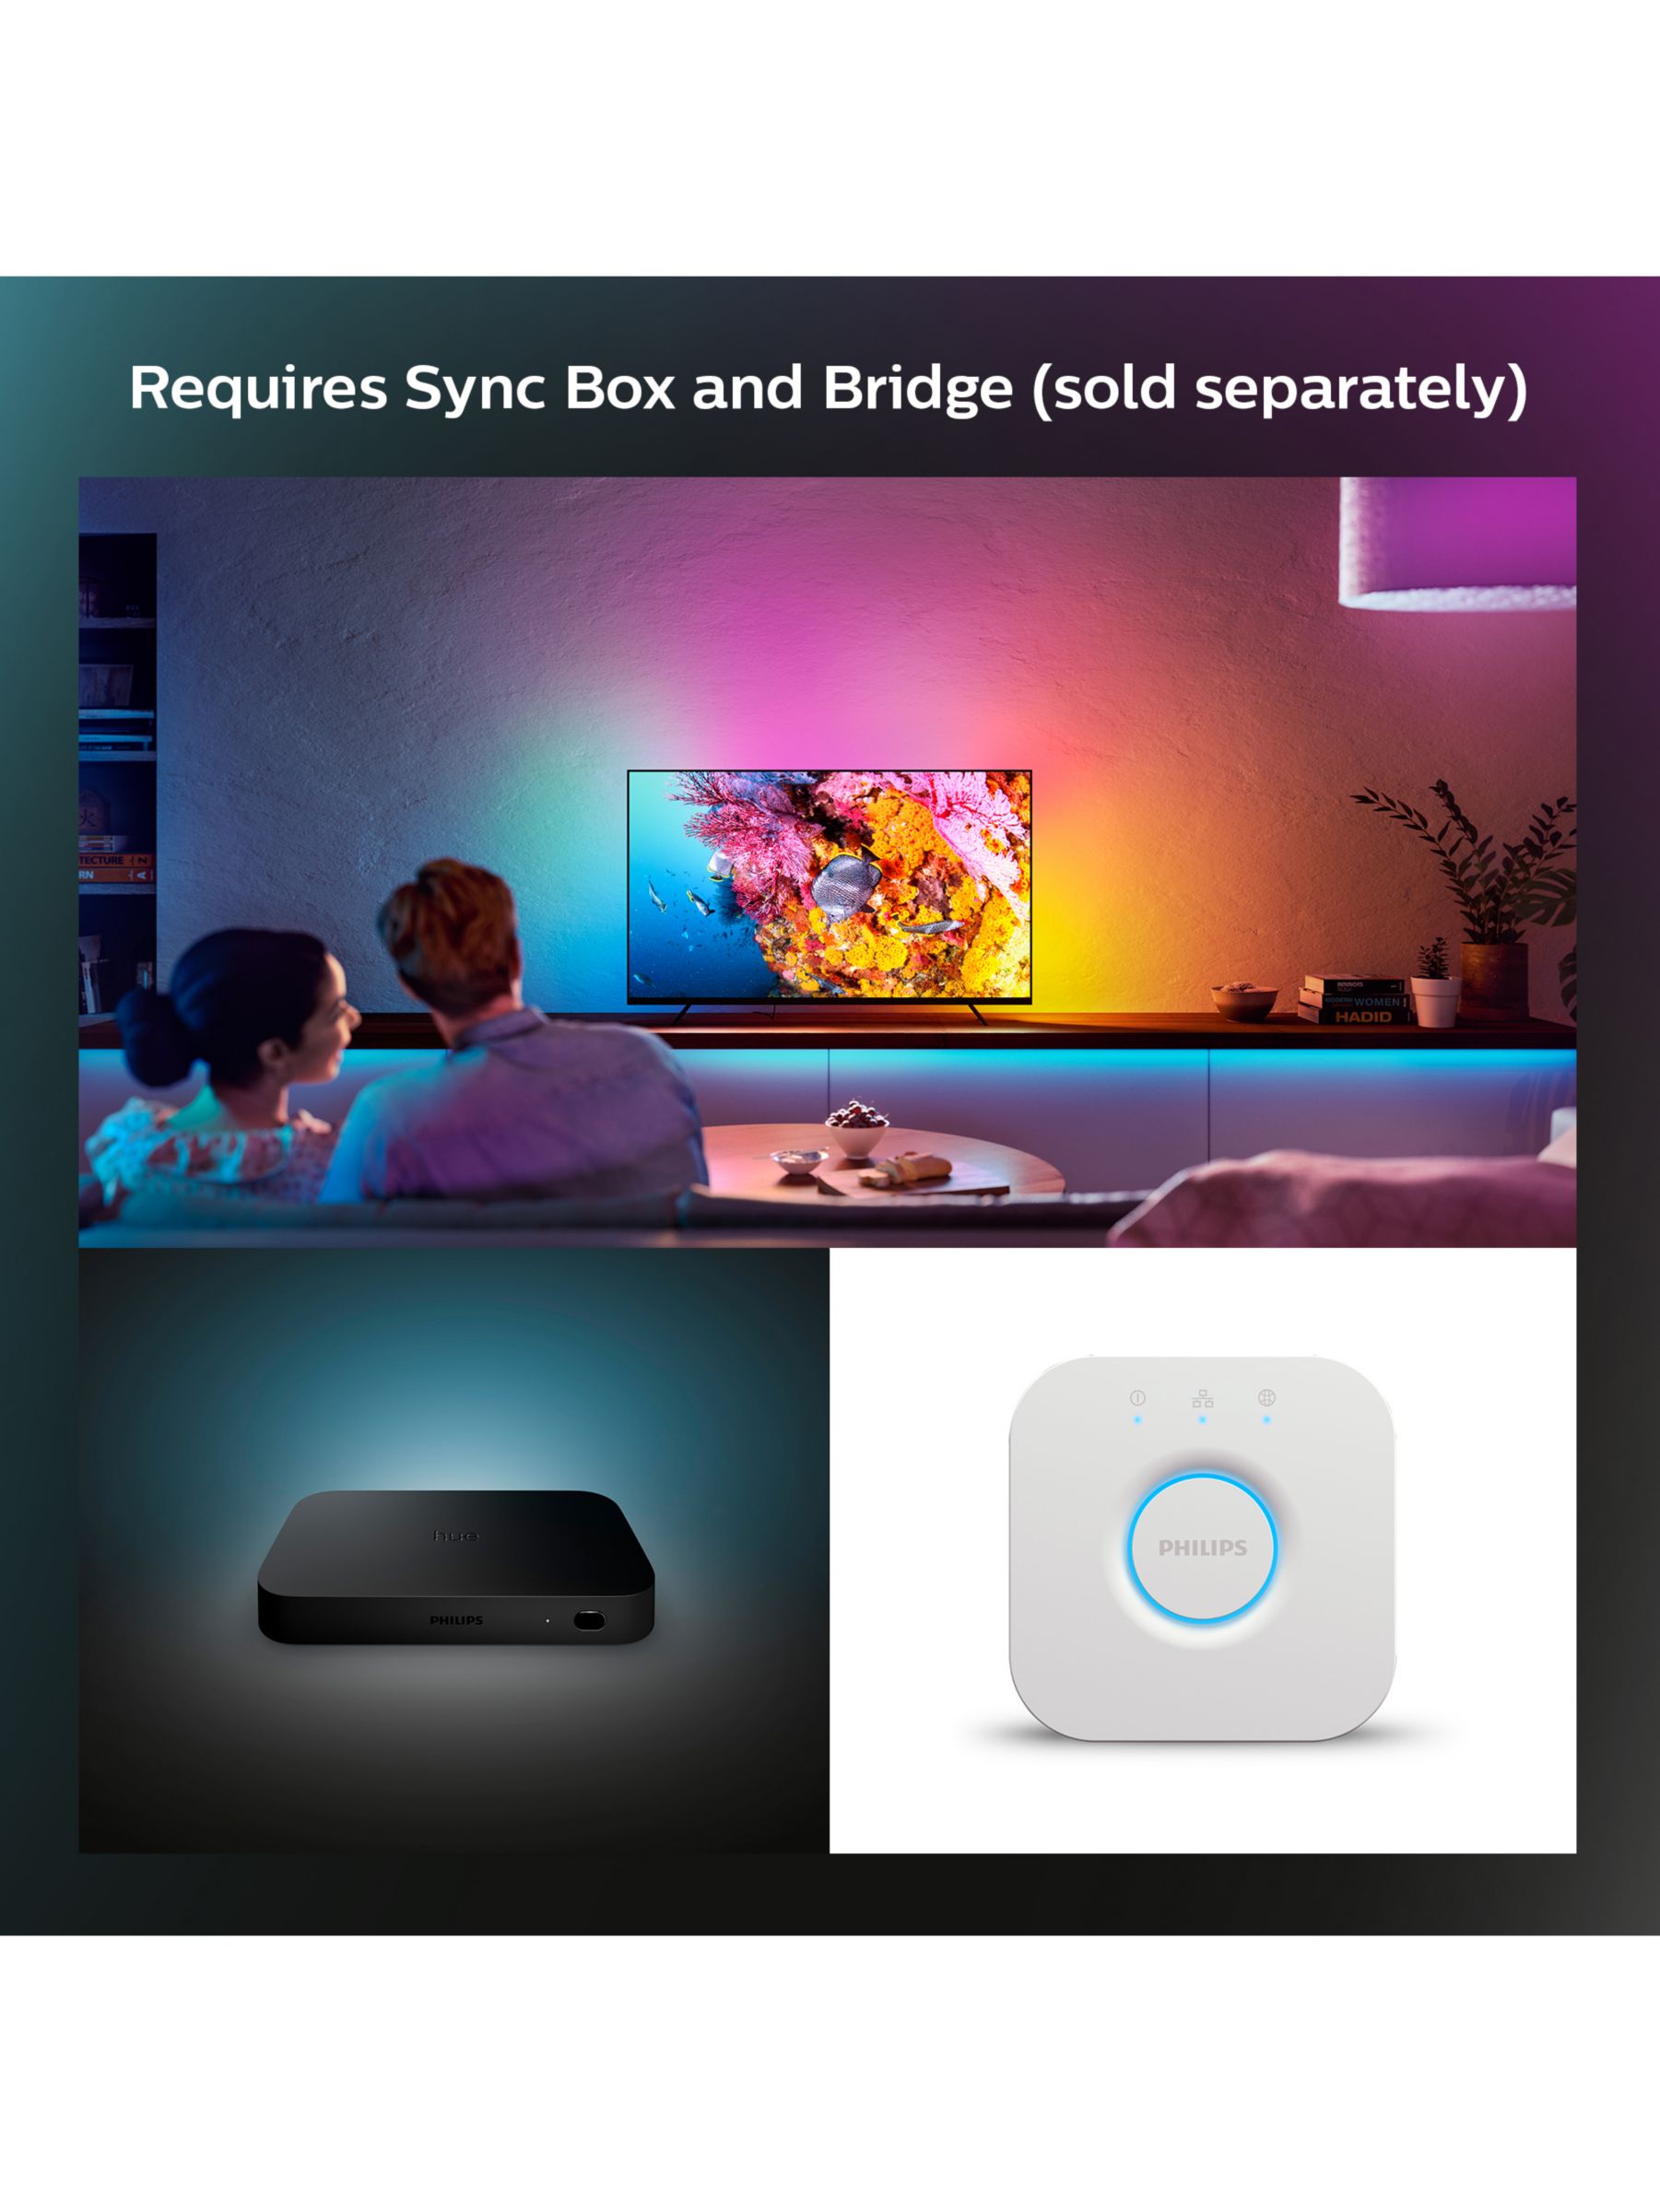 Philips Hue Sync Box Review: Make Your Living Room a Rainbow